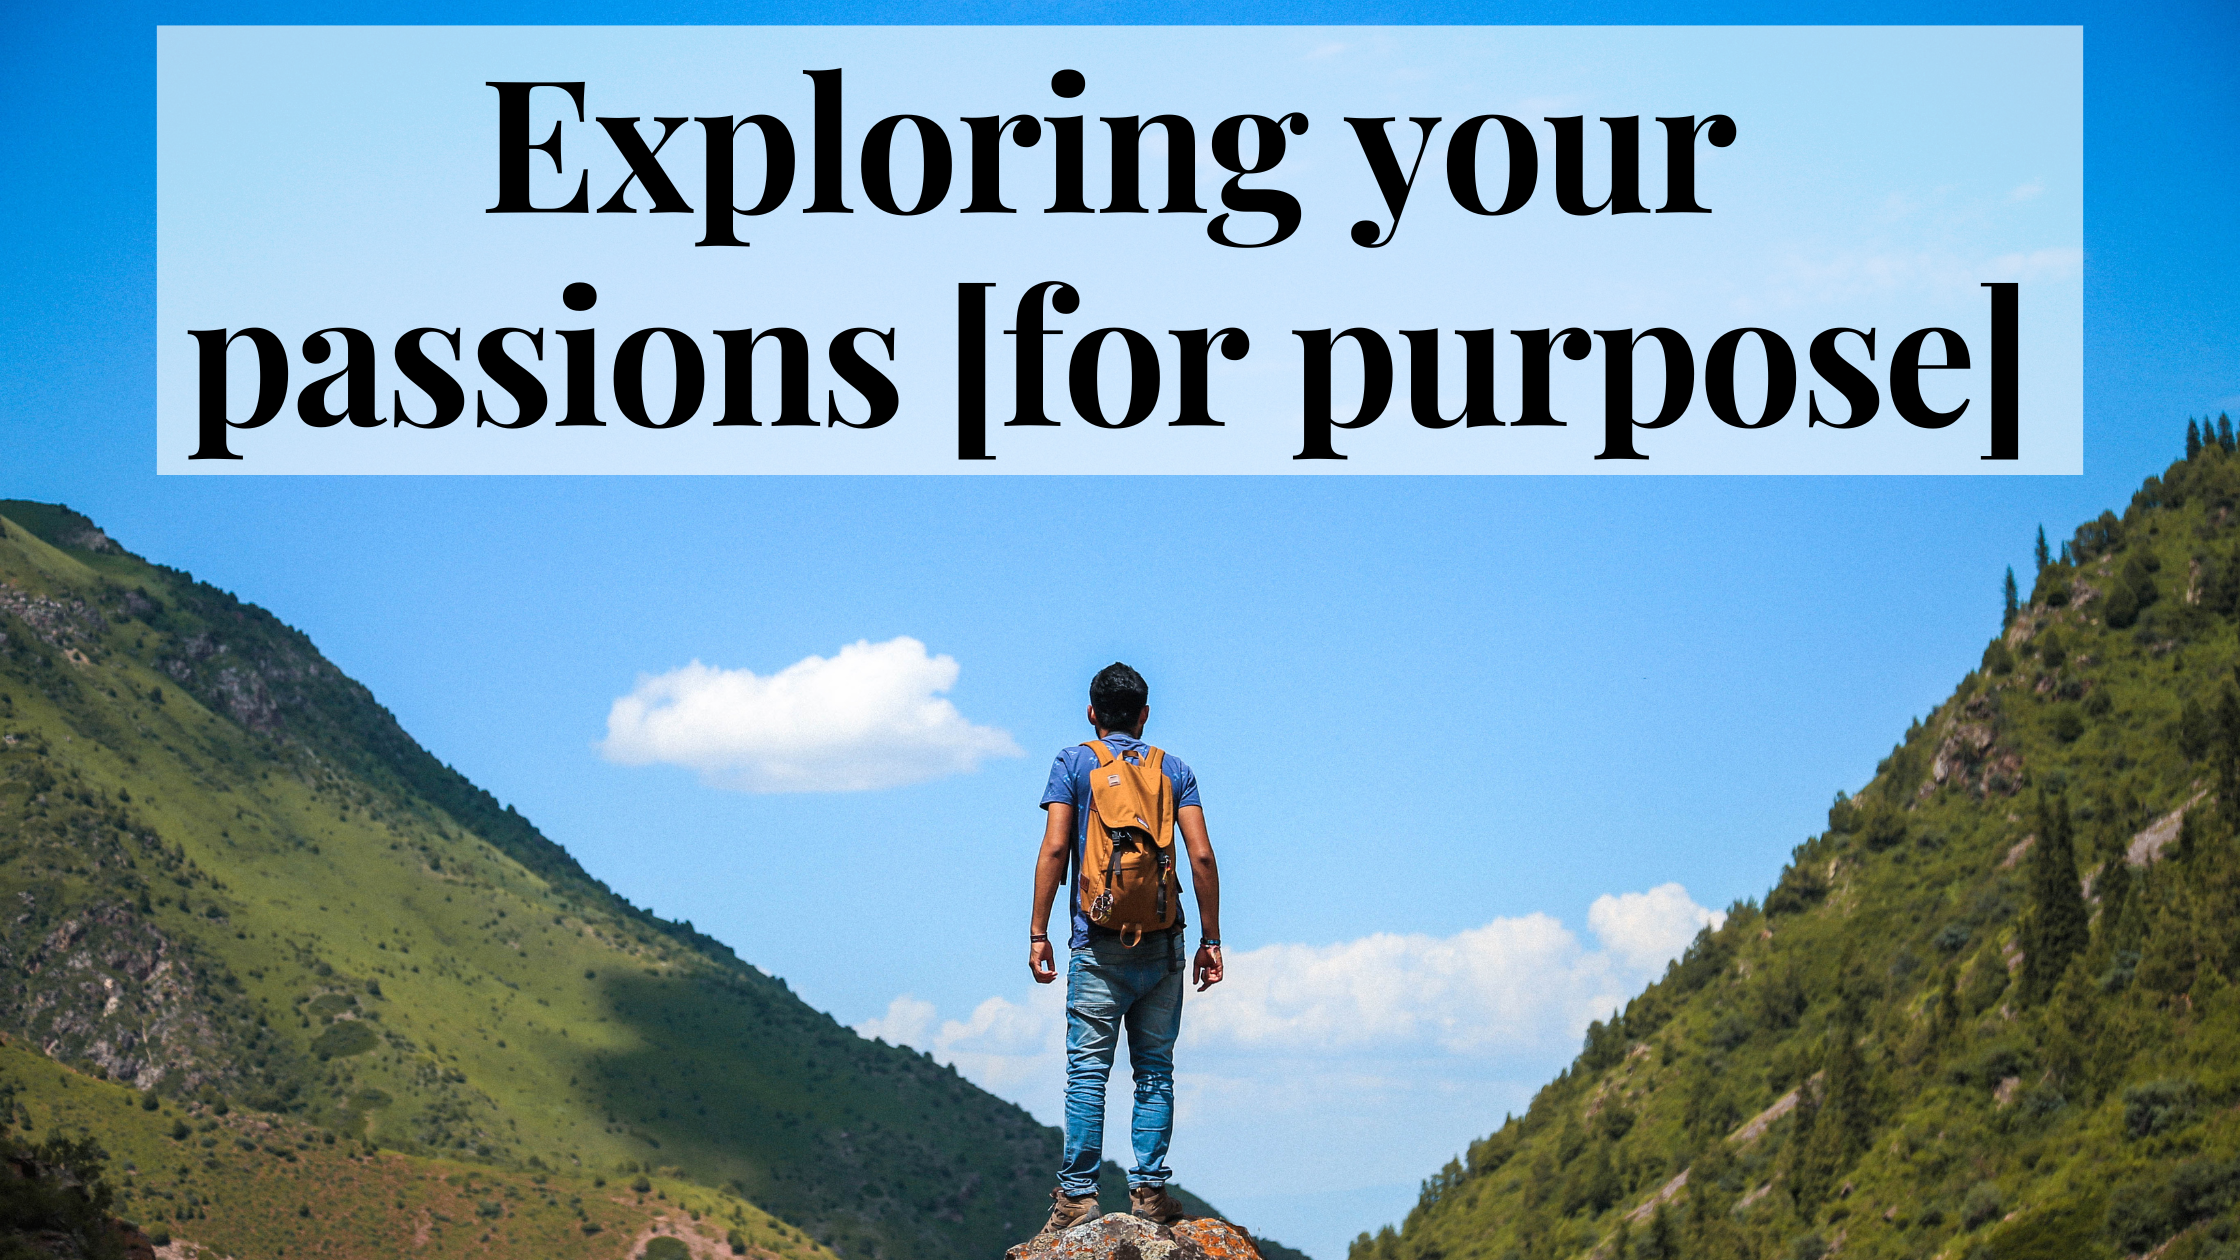 Exploring your passions for purpose